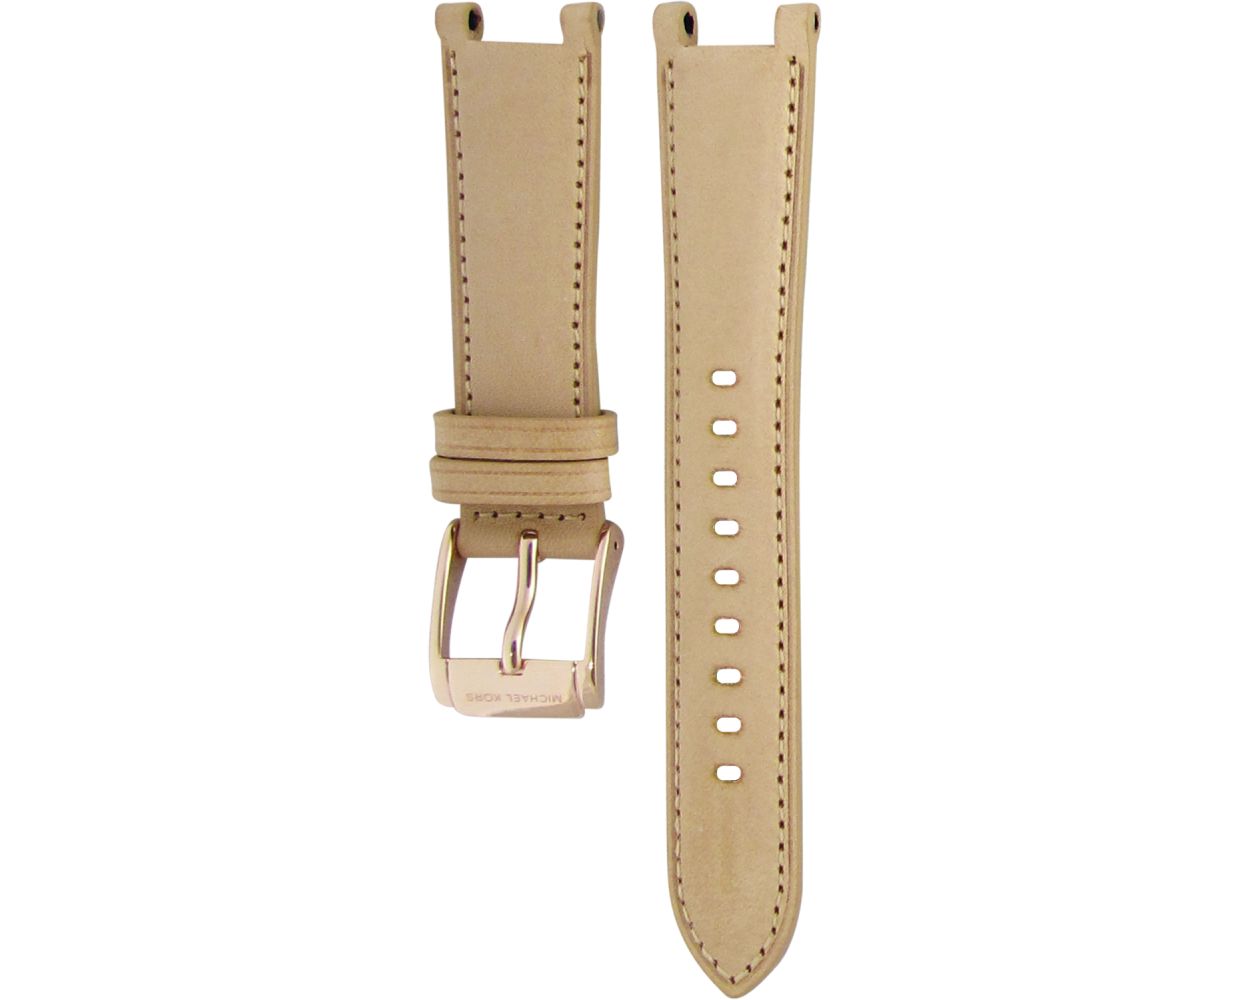 Straps replacement Beige/cream/can use to michael kors Purse